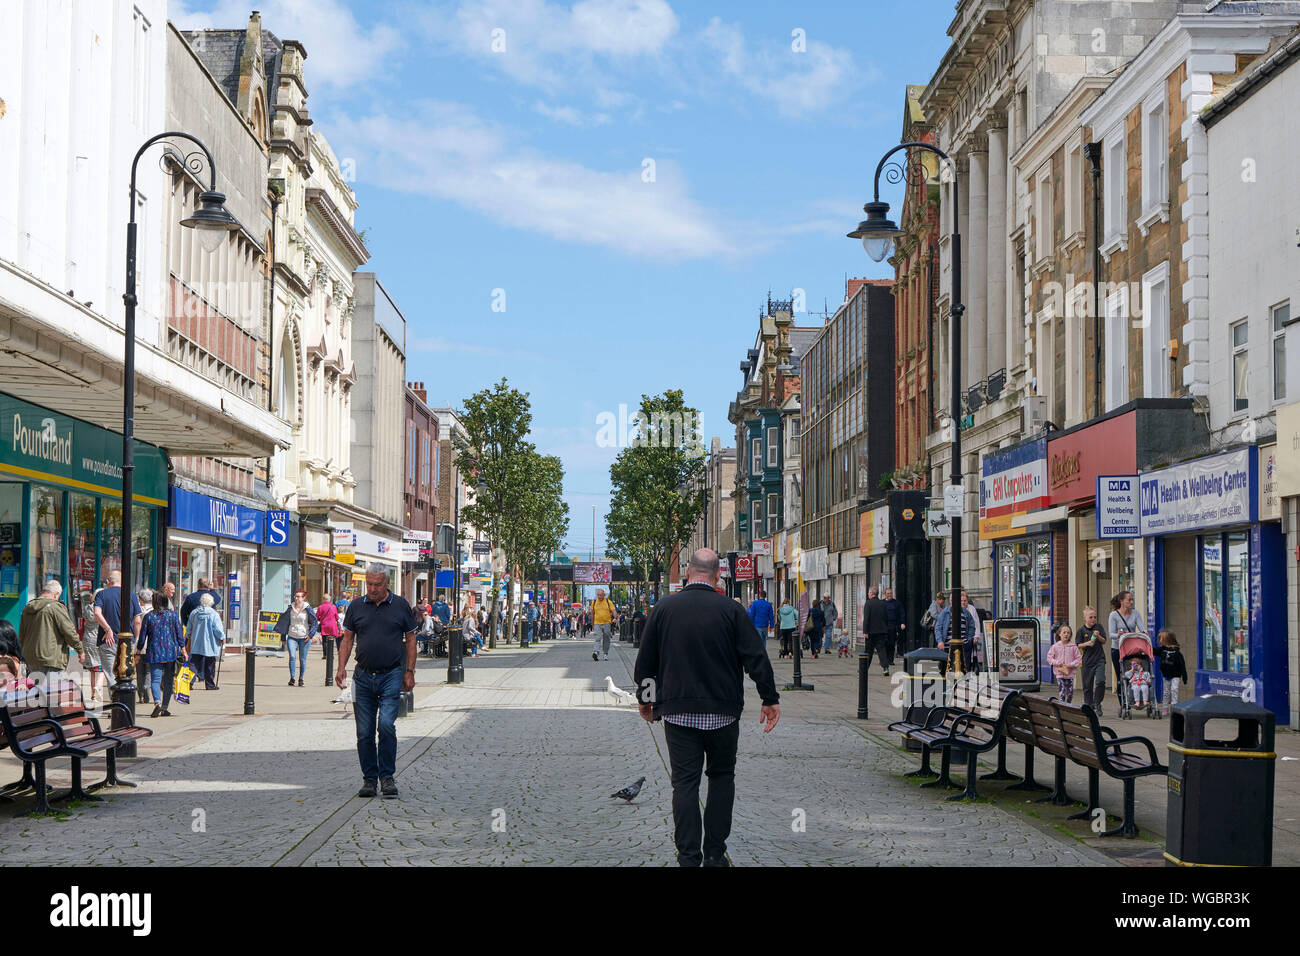 The town centre of South Shields, North East England, UK Stock Photo